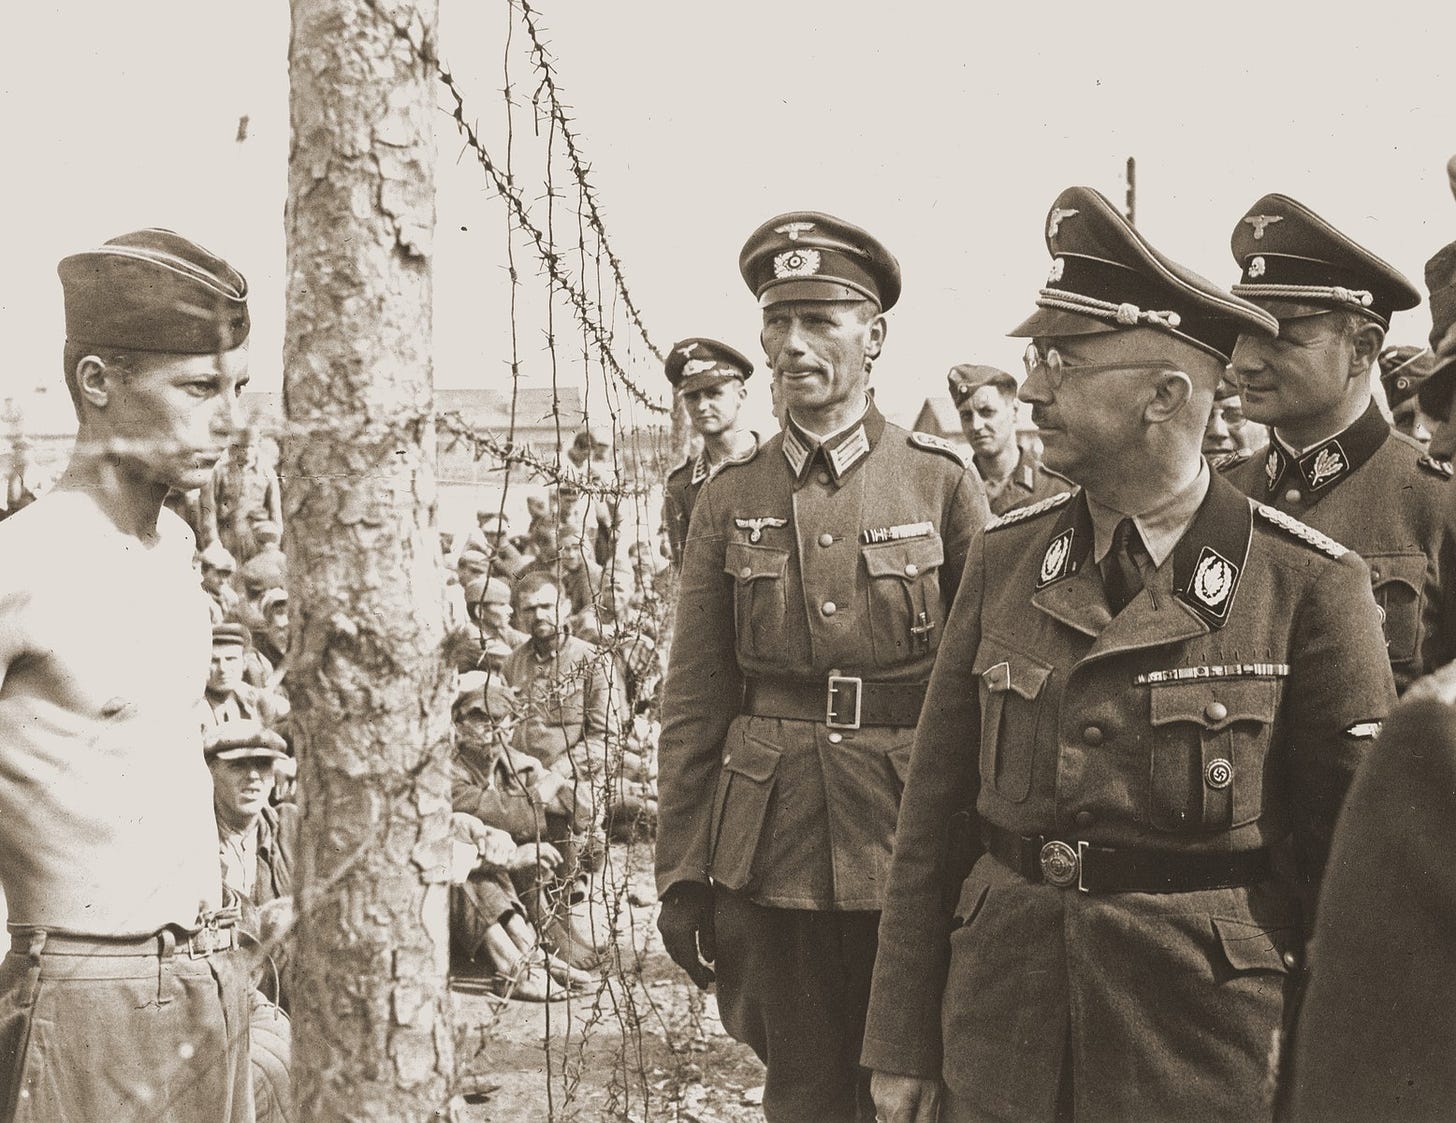 Heinrich Himmler looks at a young Soviet prisoner during an official visit to a POW camp in the vicinity of Minsk.  

His Chief of Staff, Karl Wolff, can be seen by Himmler's left shoulder.